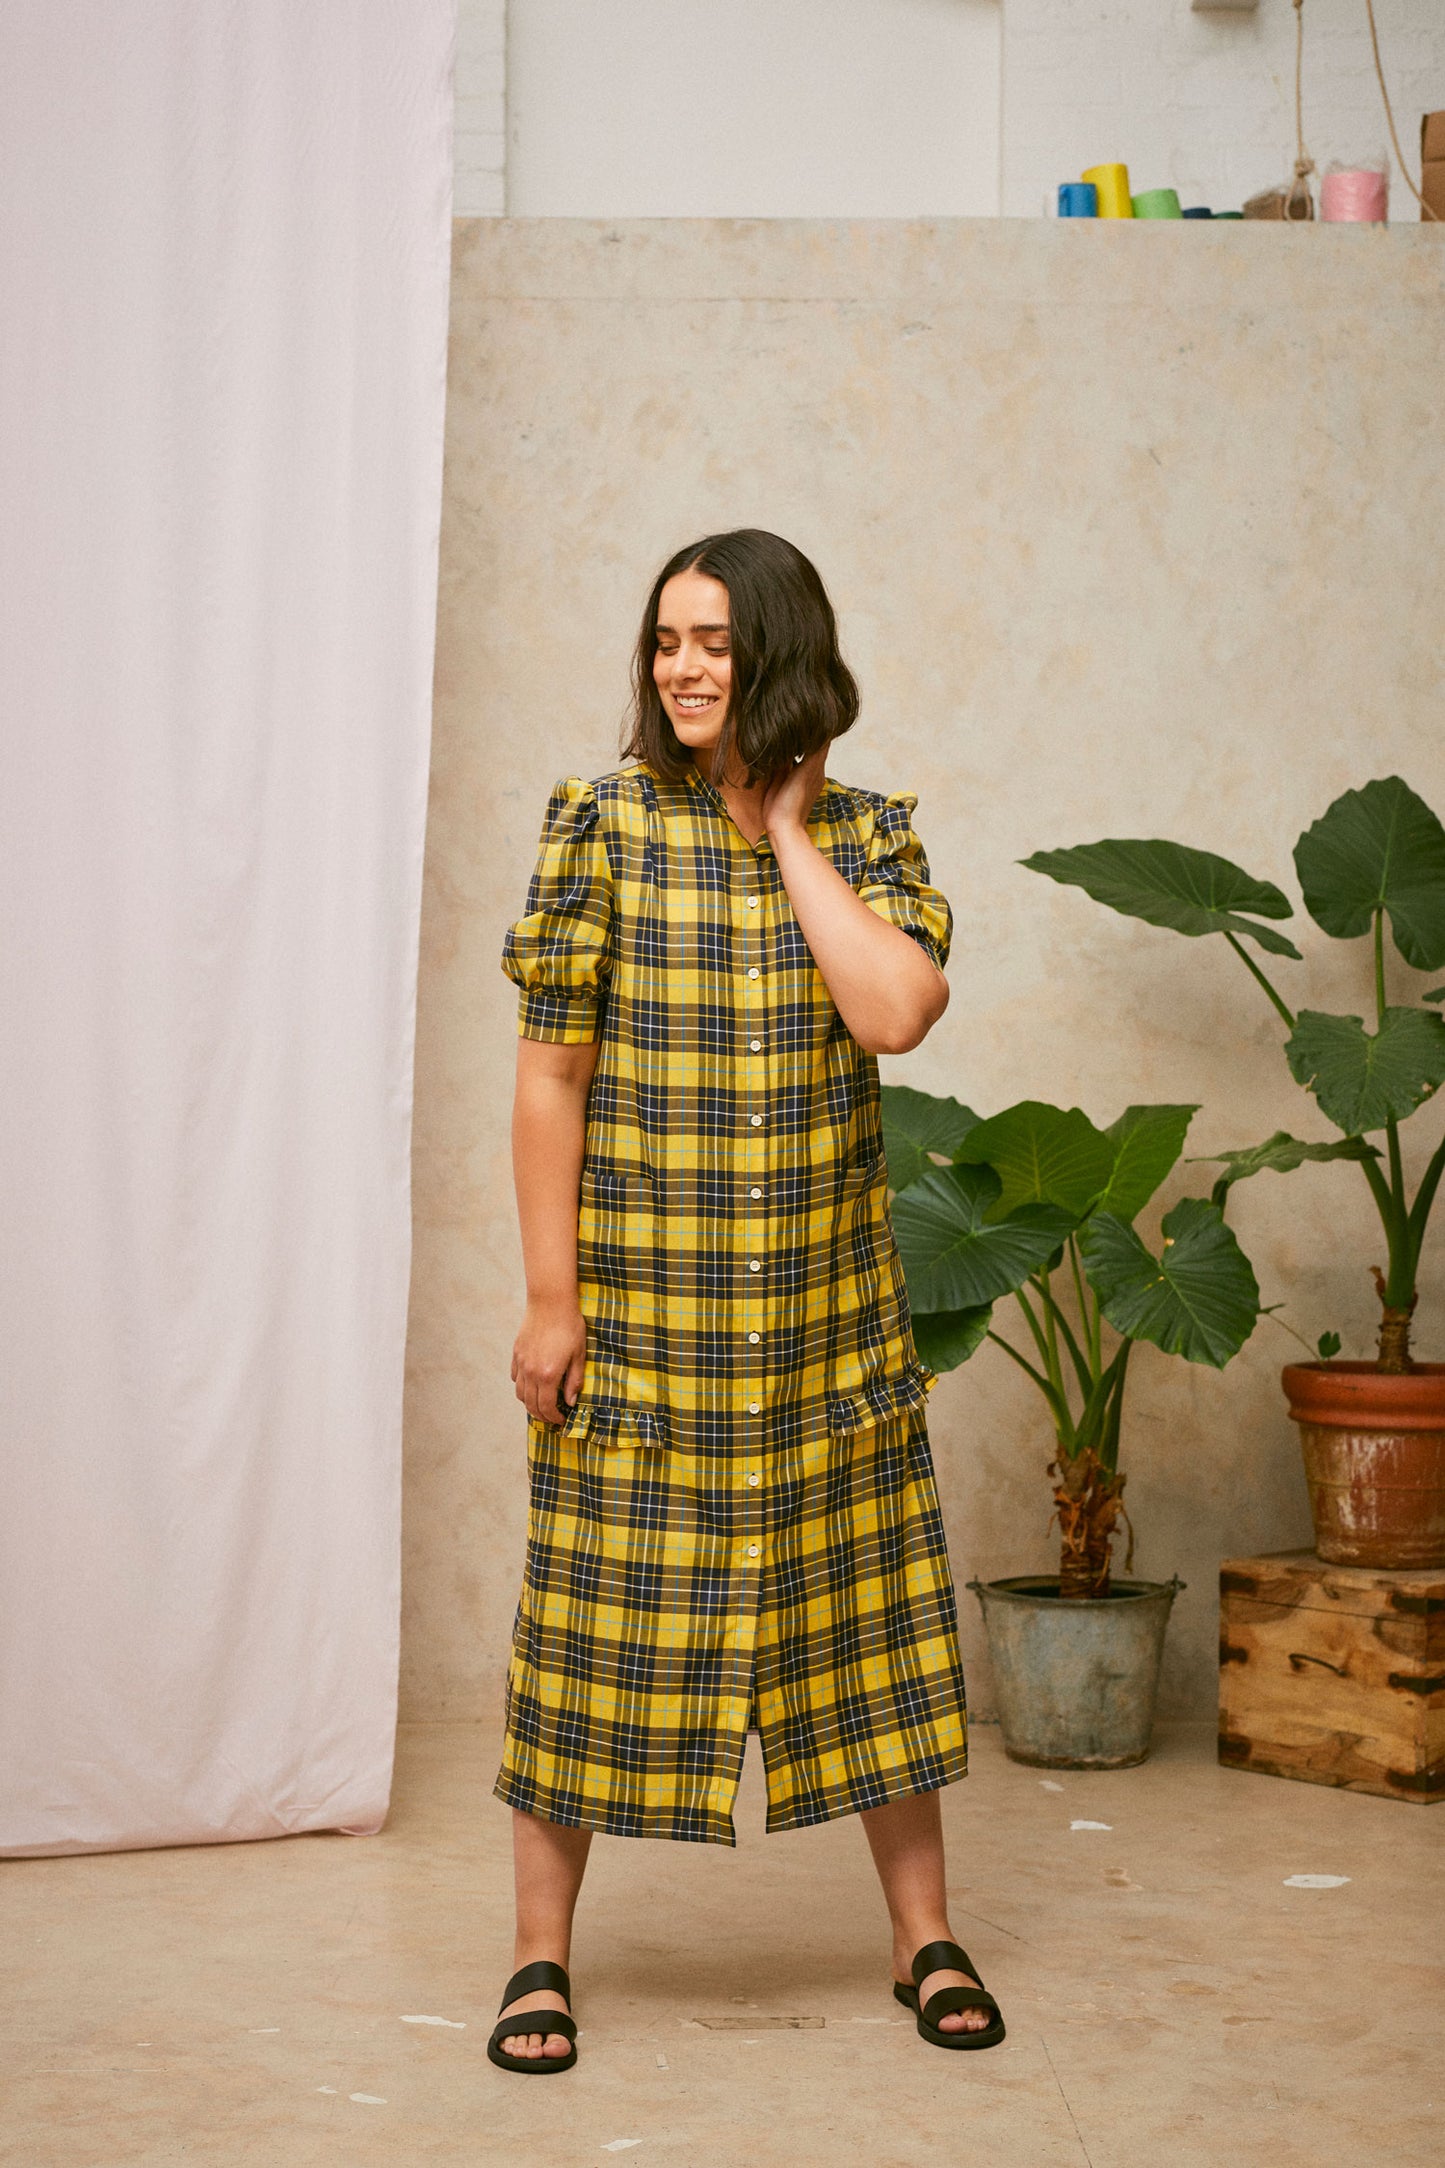 Full length shot of model wearing Saywood's Rosa yellow check shirtdress, loosely worn without a belt. Puff sleeves and patch pockets with ruffles are on the dress. Model has one hand to her neck and the dress is worn with black sandals. A plant and drop of pink fabric can be seen in the background.